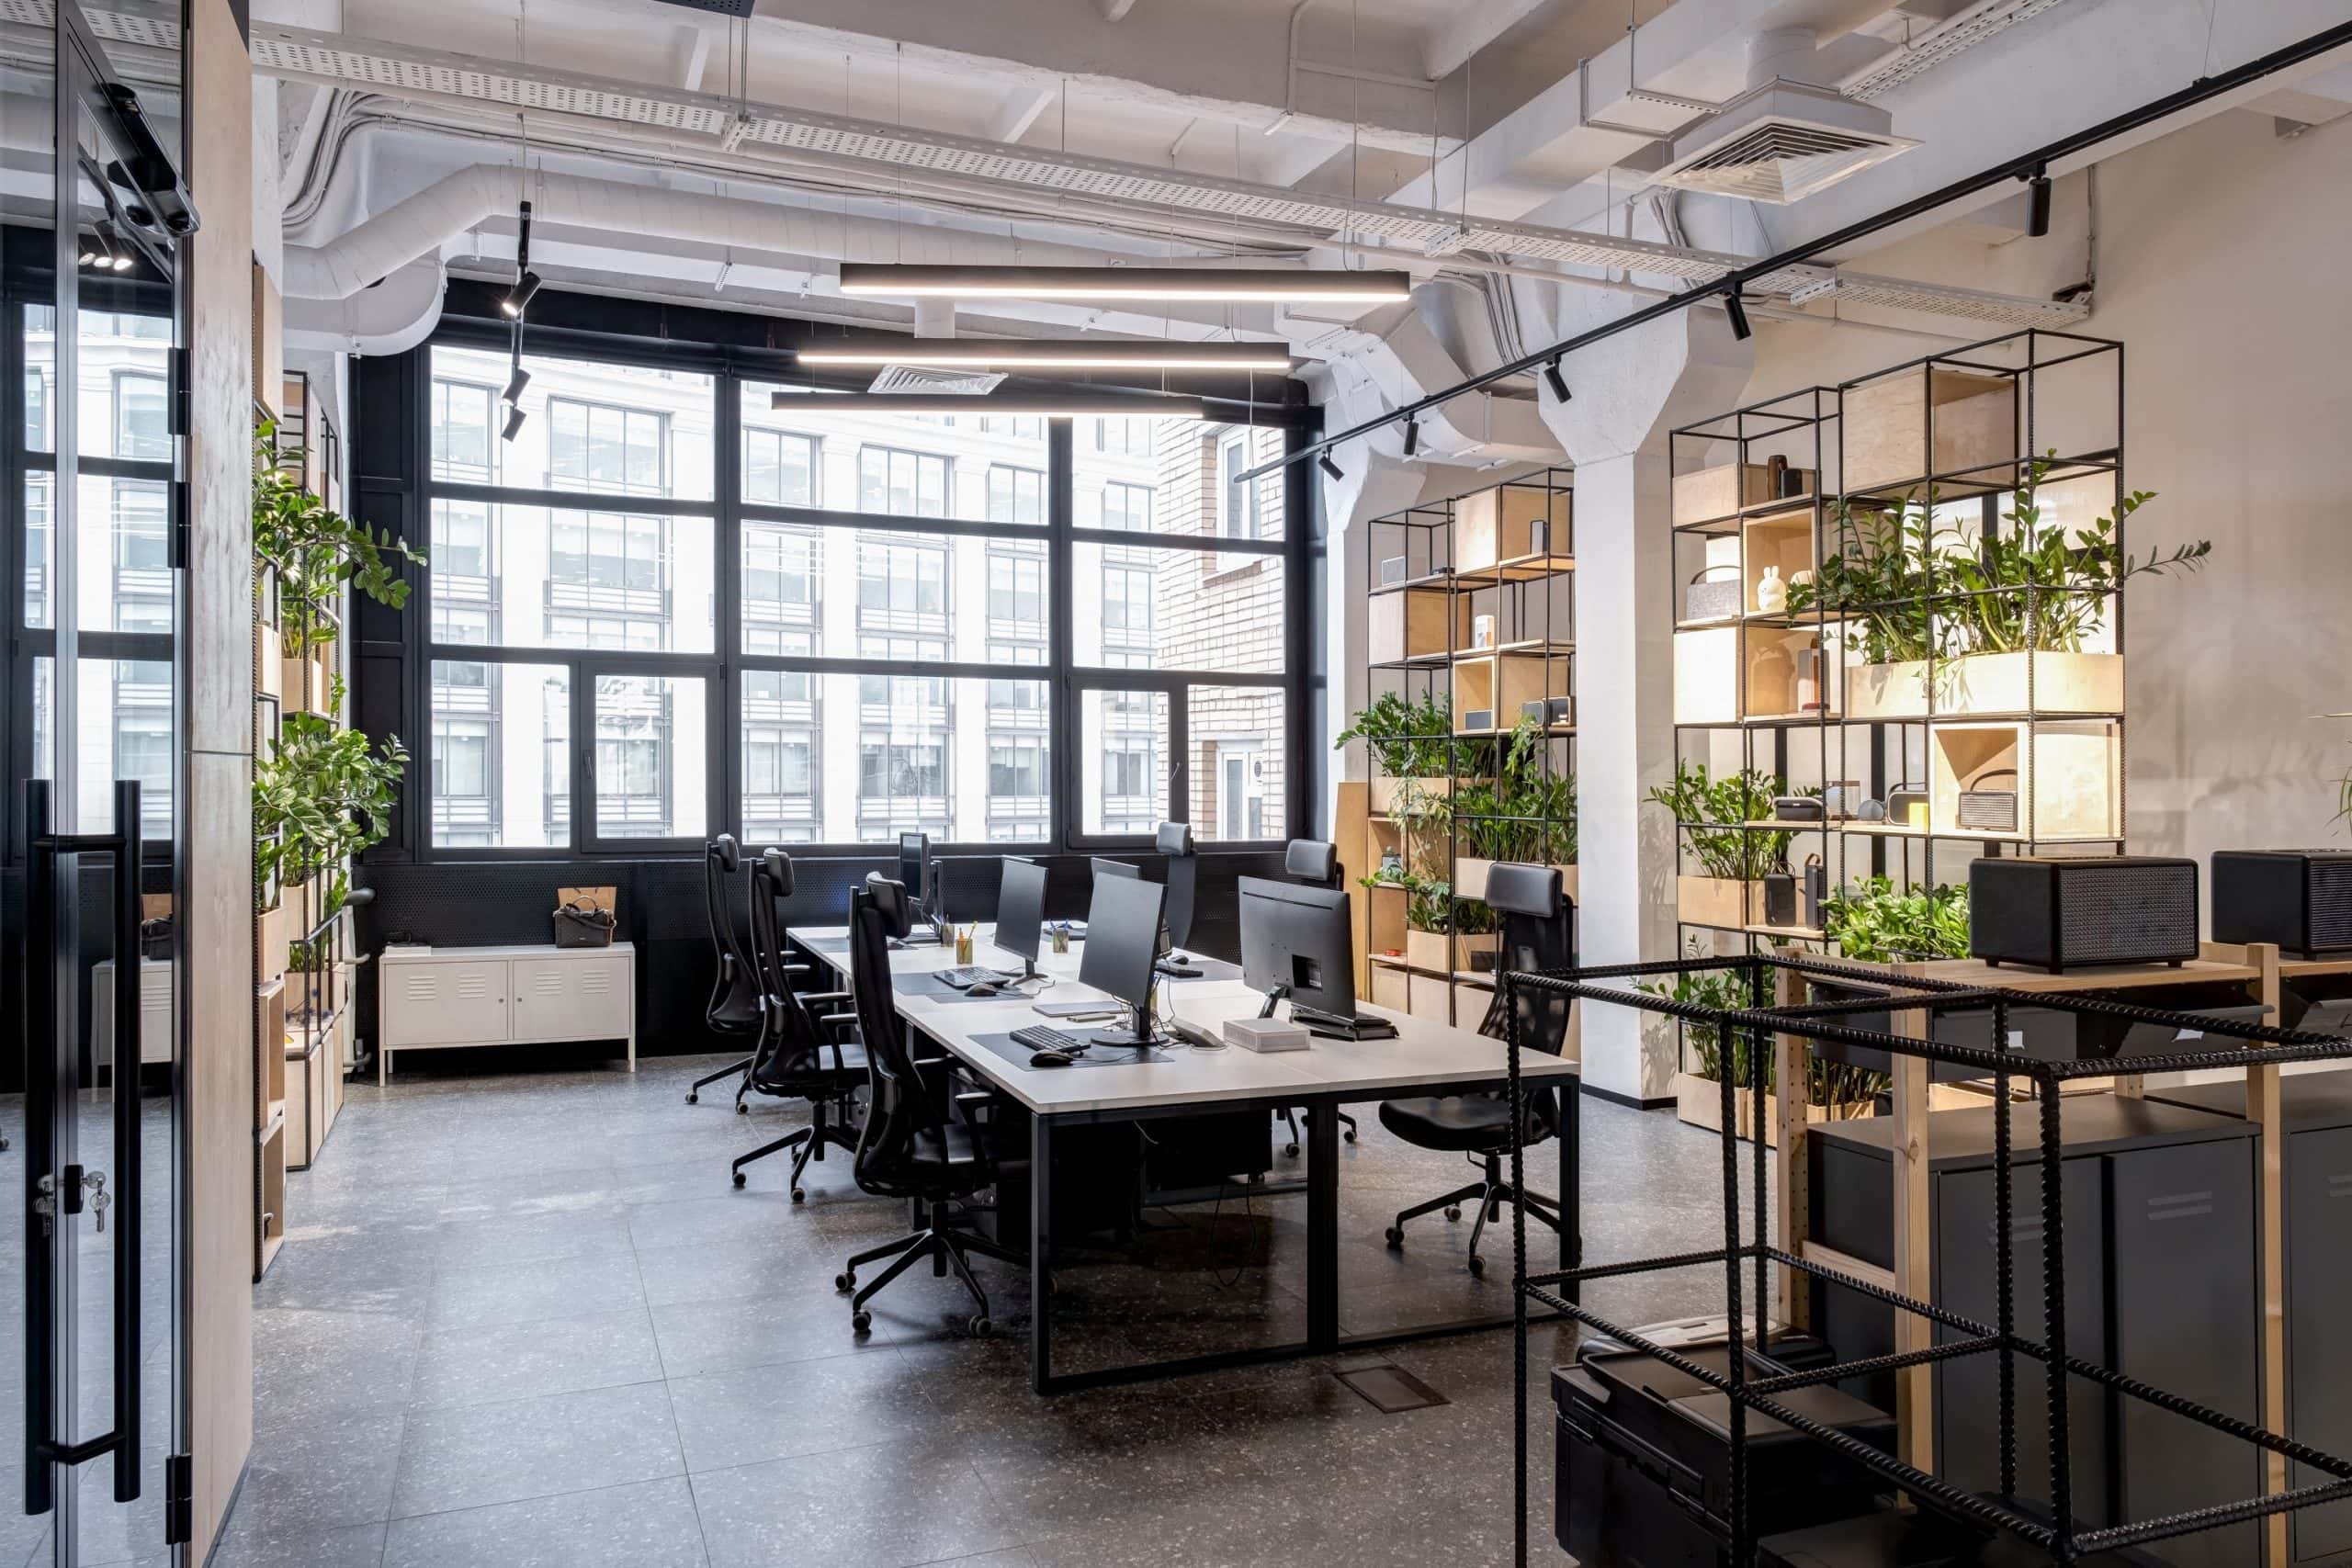 Office space redesign – is it always necessary?